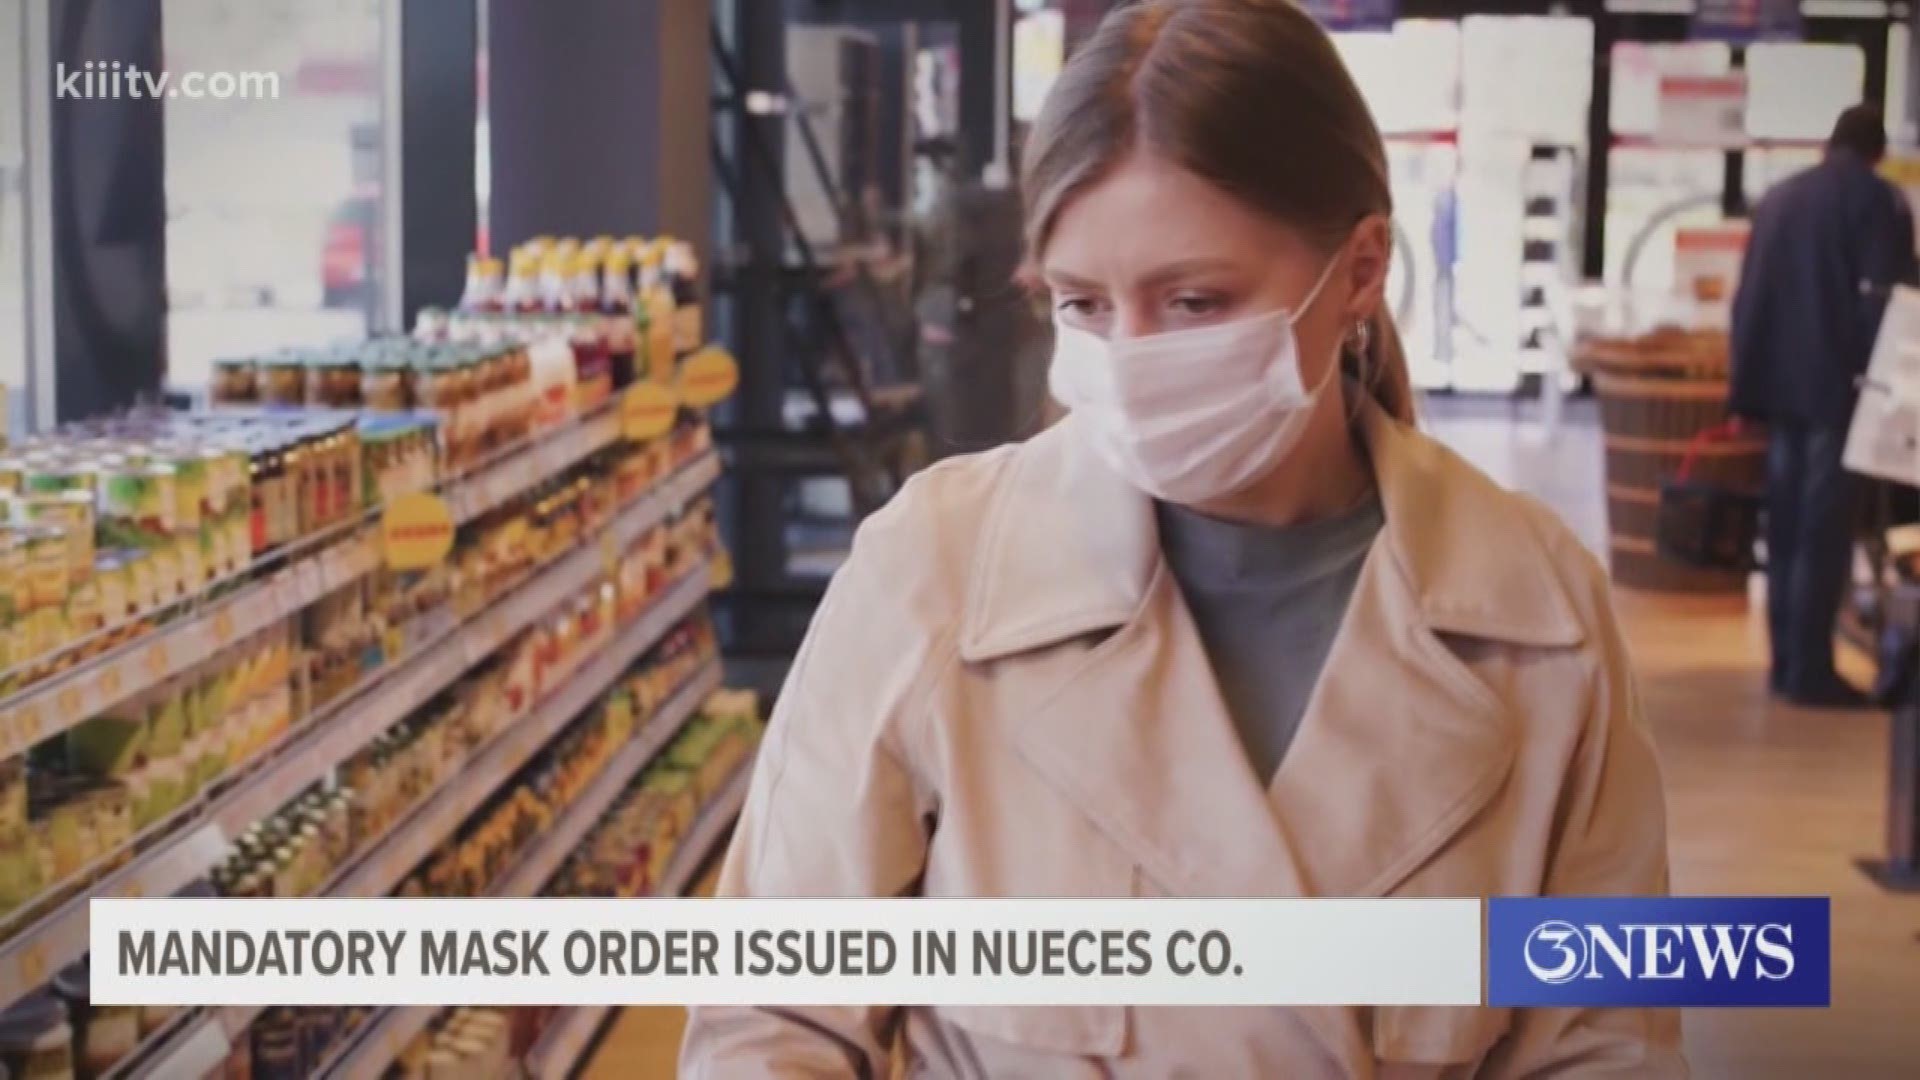 The order would mandate masks be worn in grocery stores, malls and government buildings. Masks would be highly recommended for privately owned businesses.